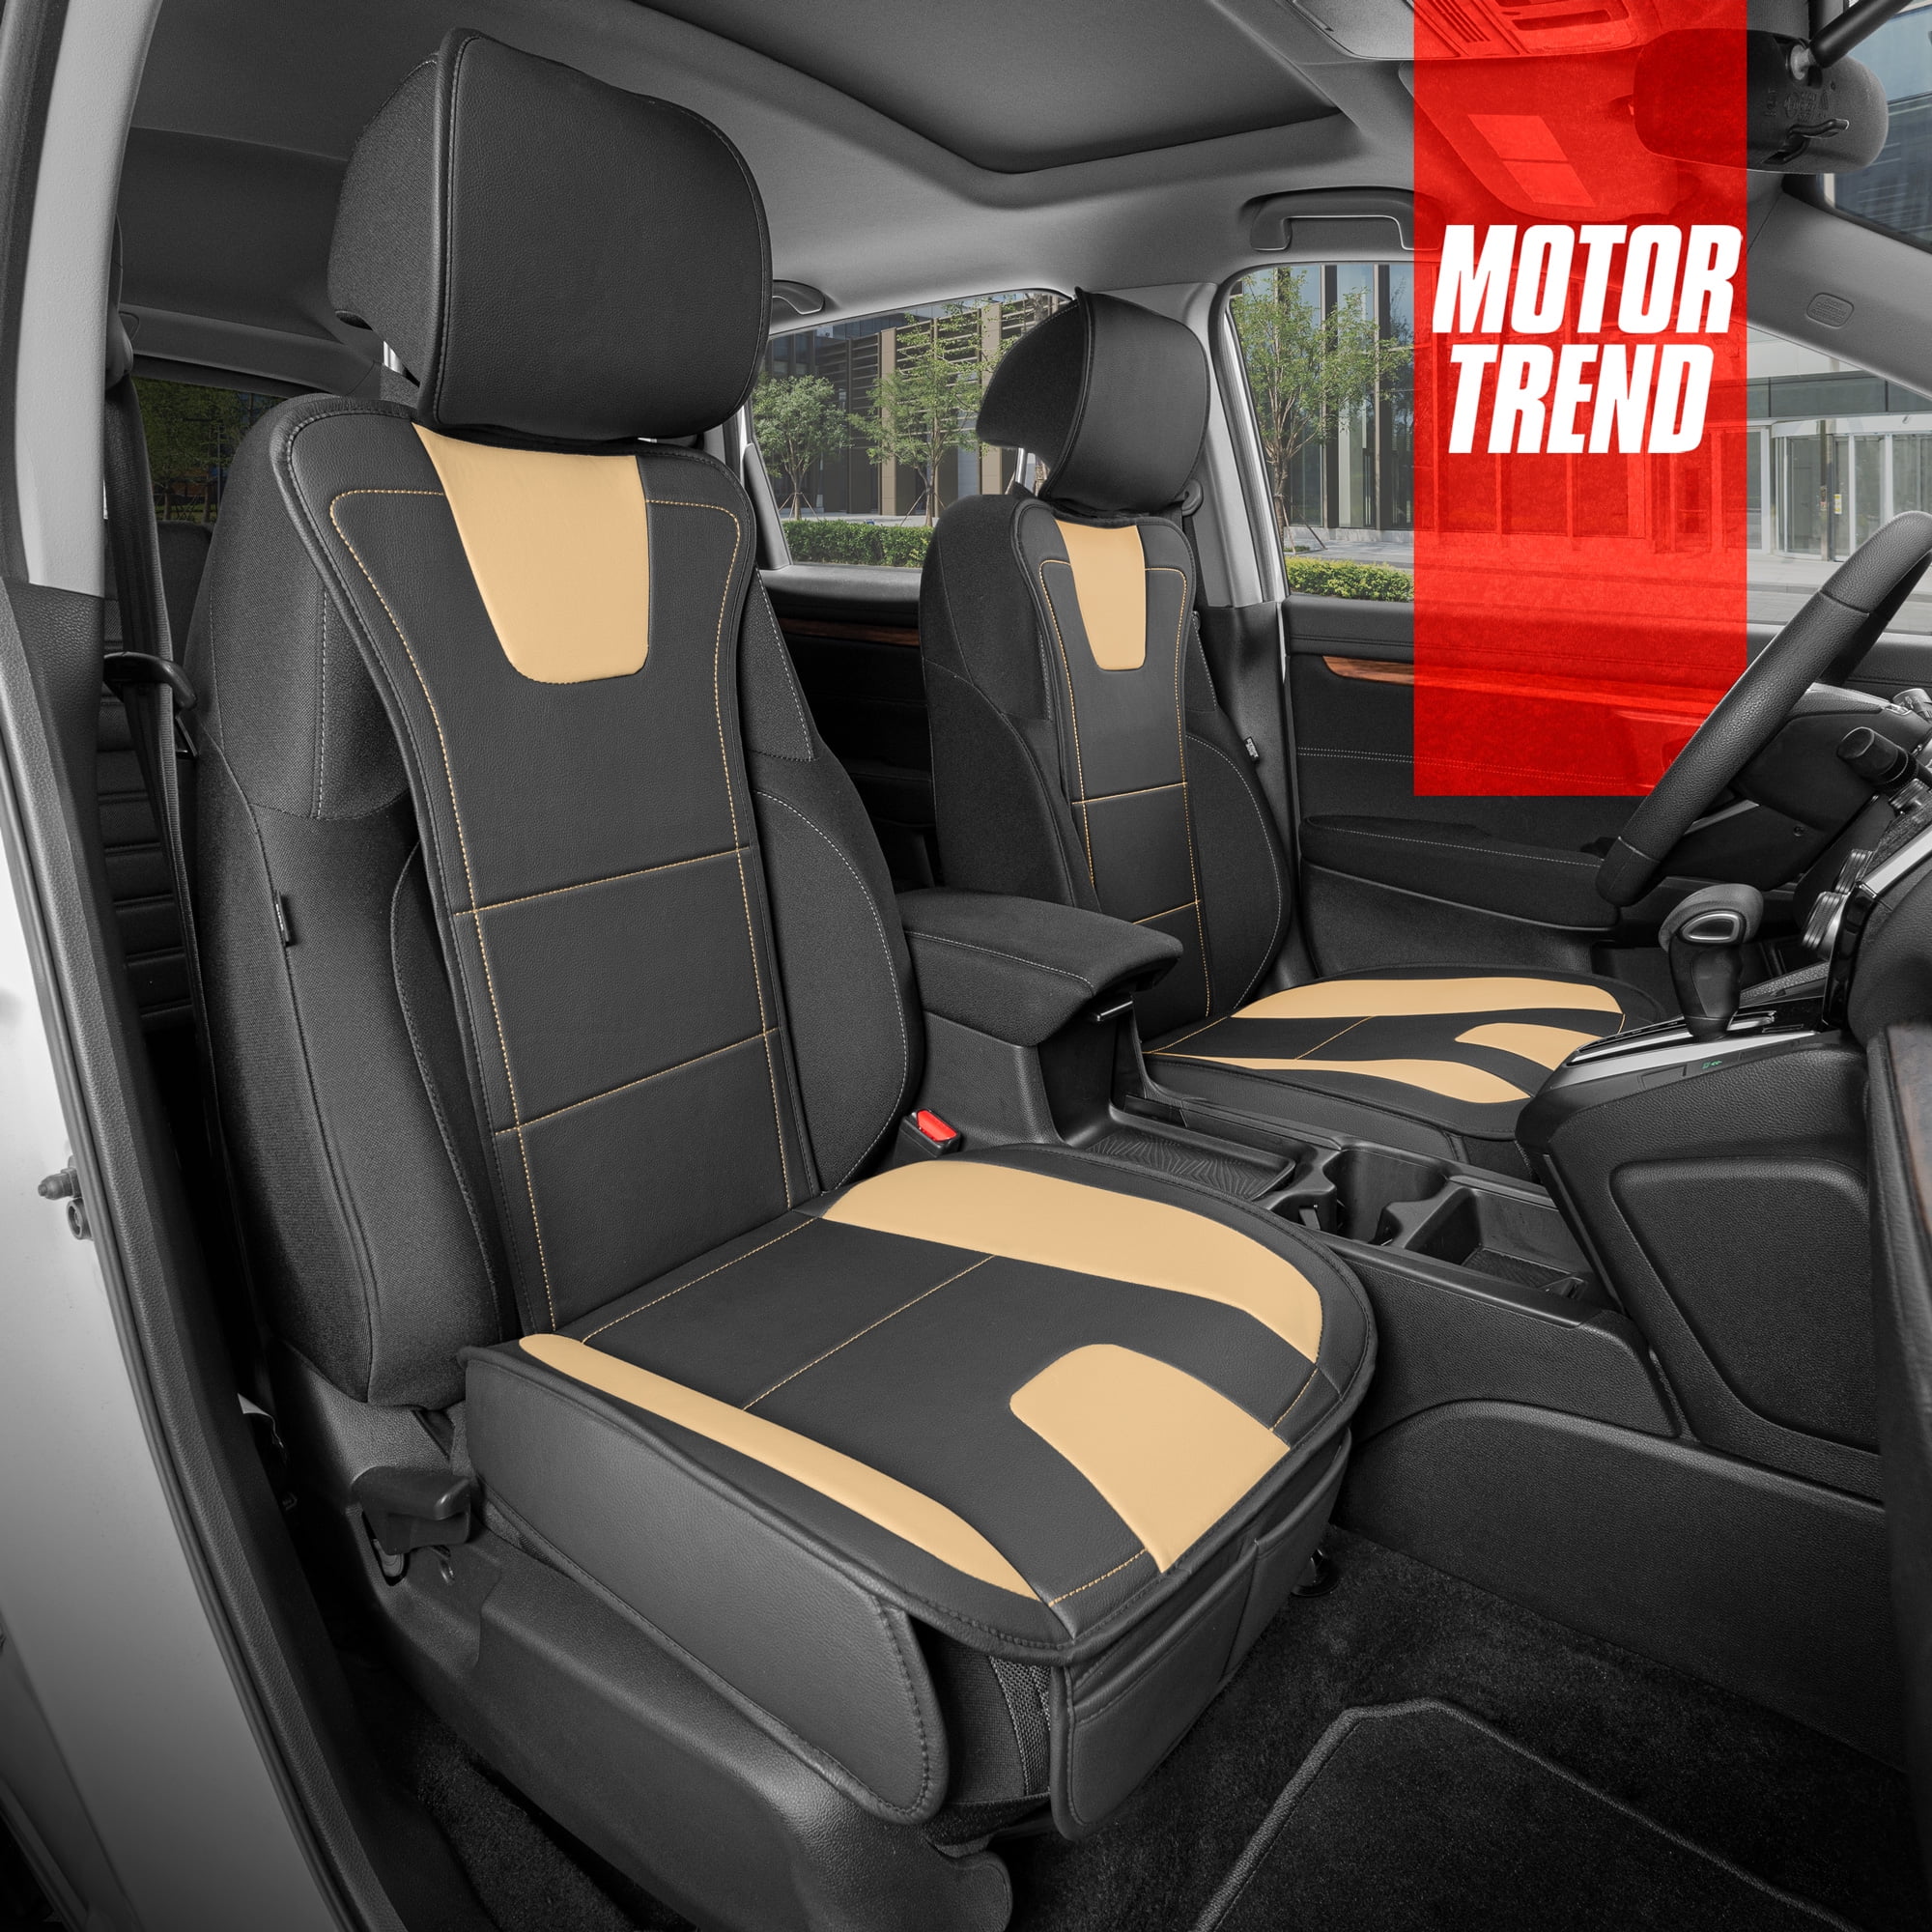 Motor Trend DuraLuxe Faux Gray Leather Seat Covers for Car Truck